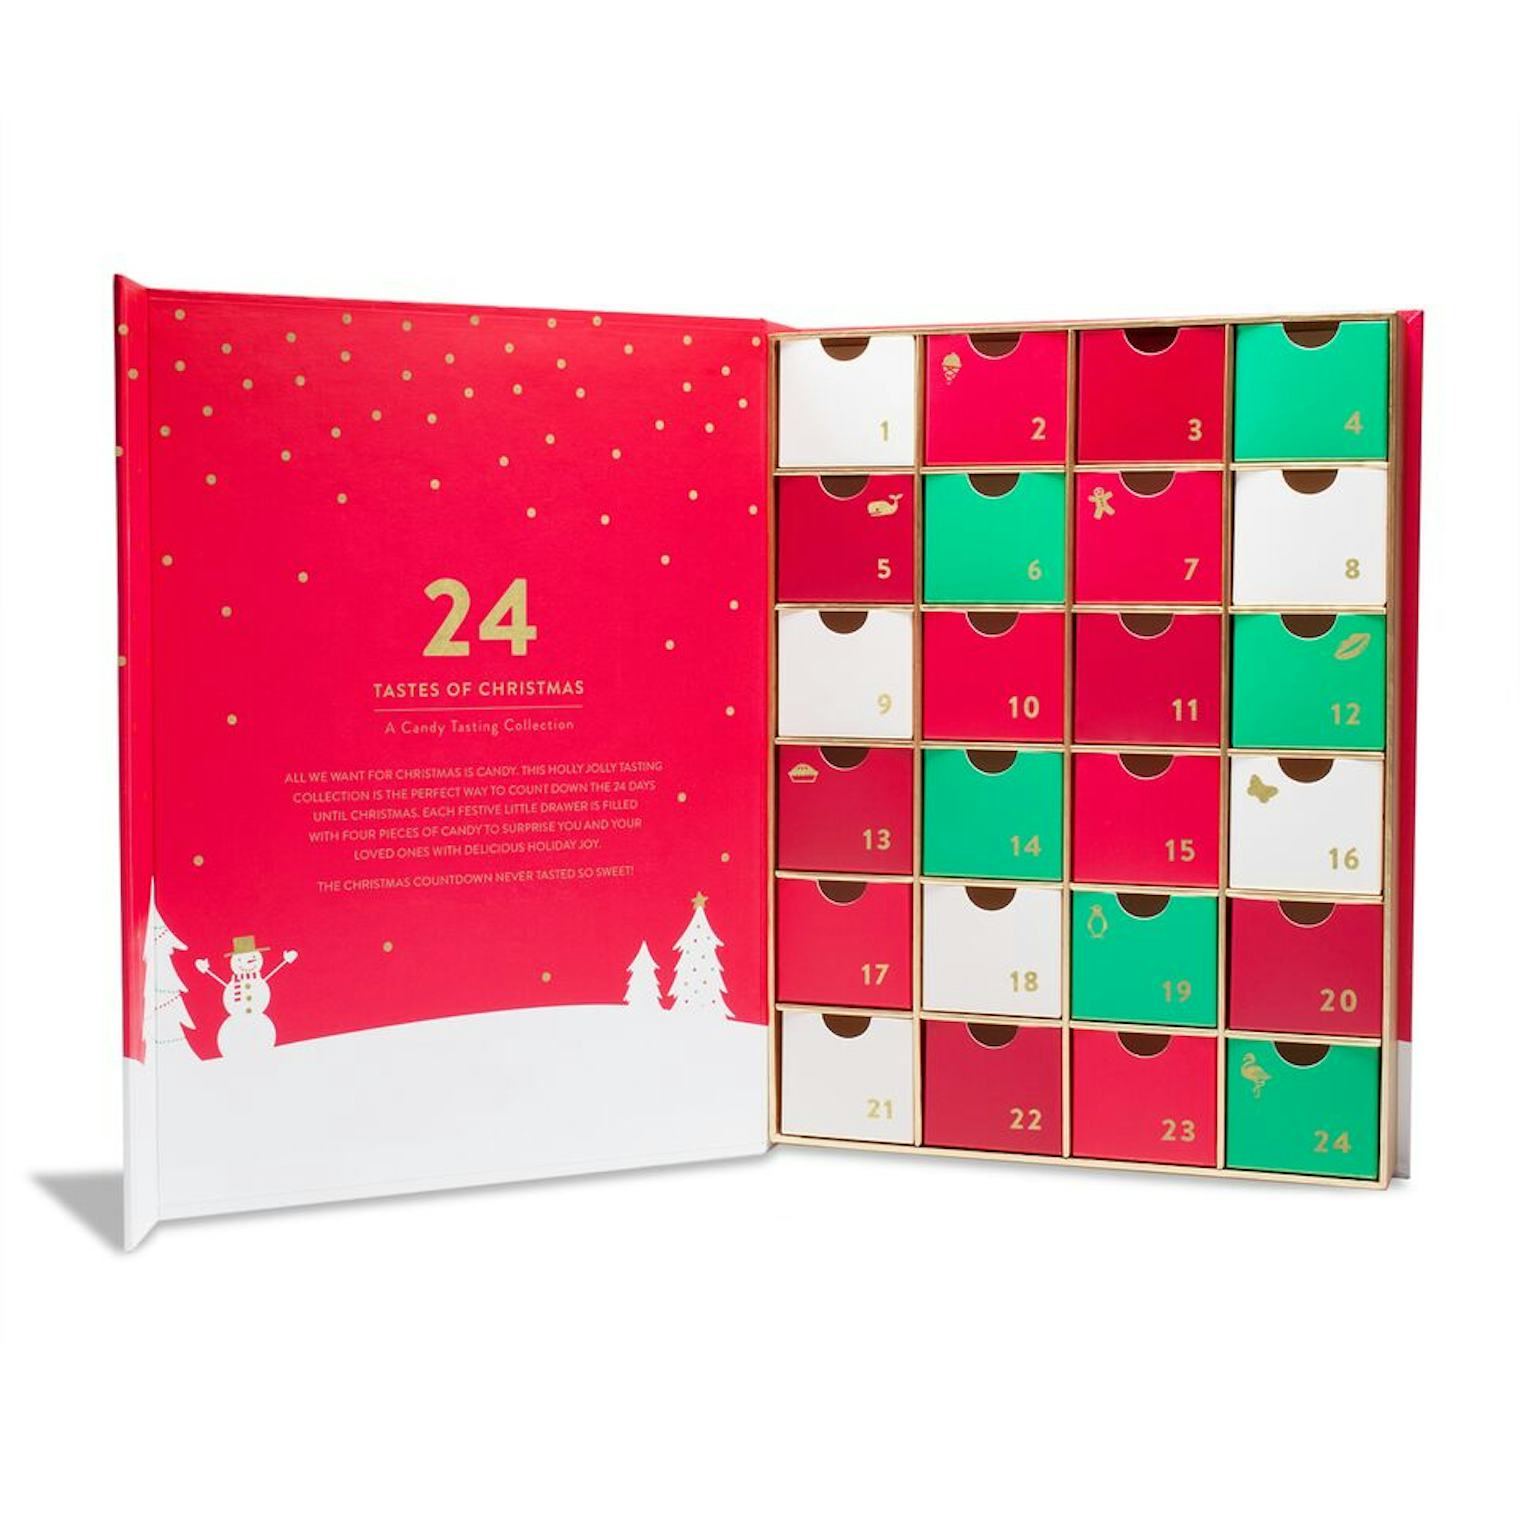 Sugarfina's Advent Calendar For 2018 Features 24 Days Of Holiday